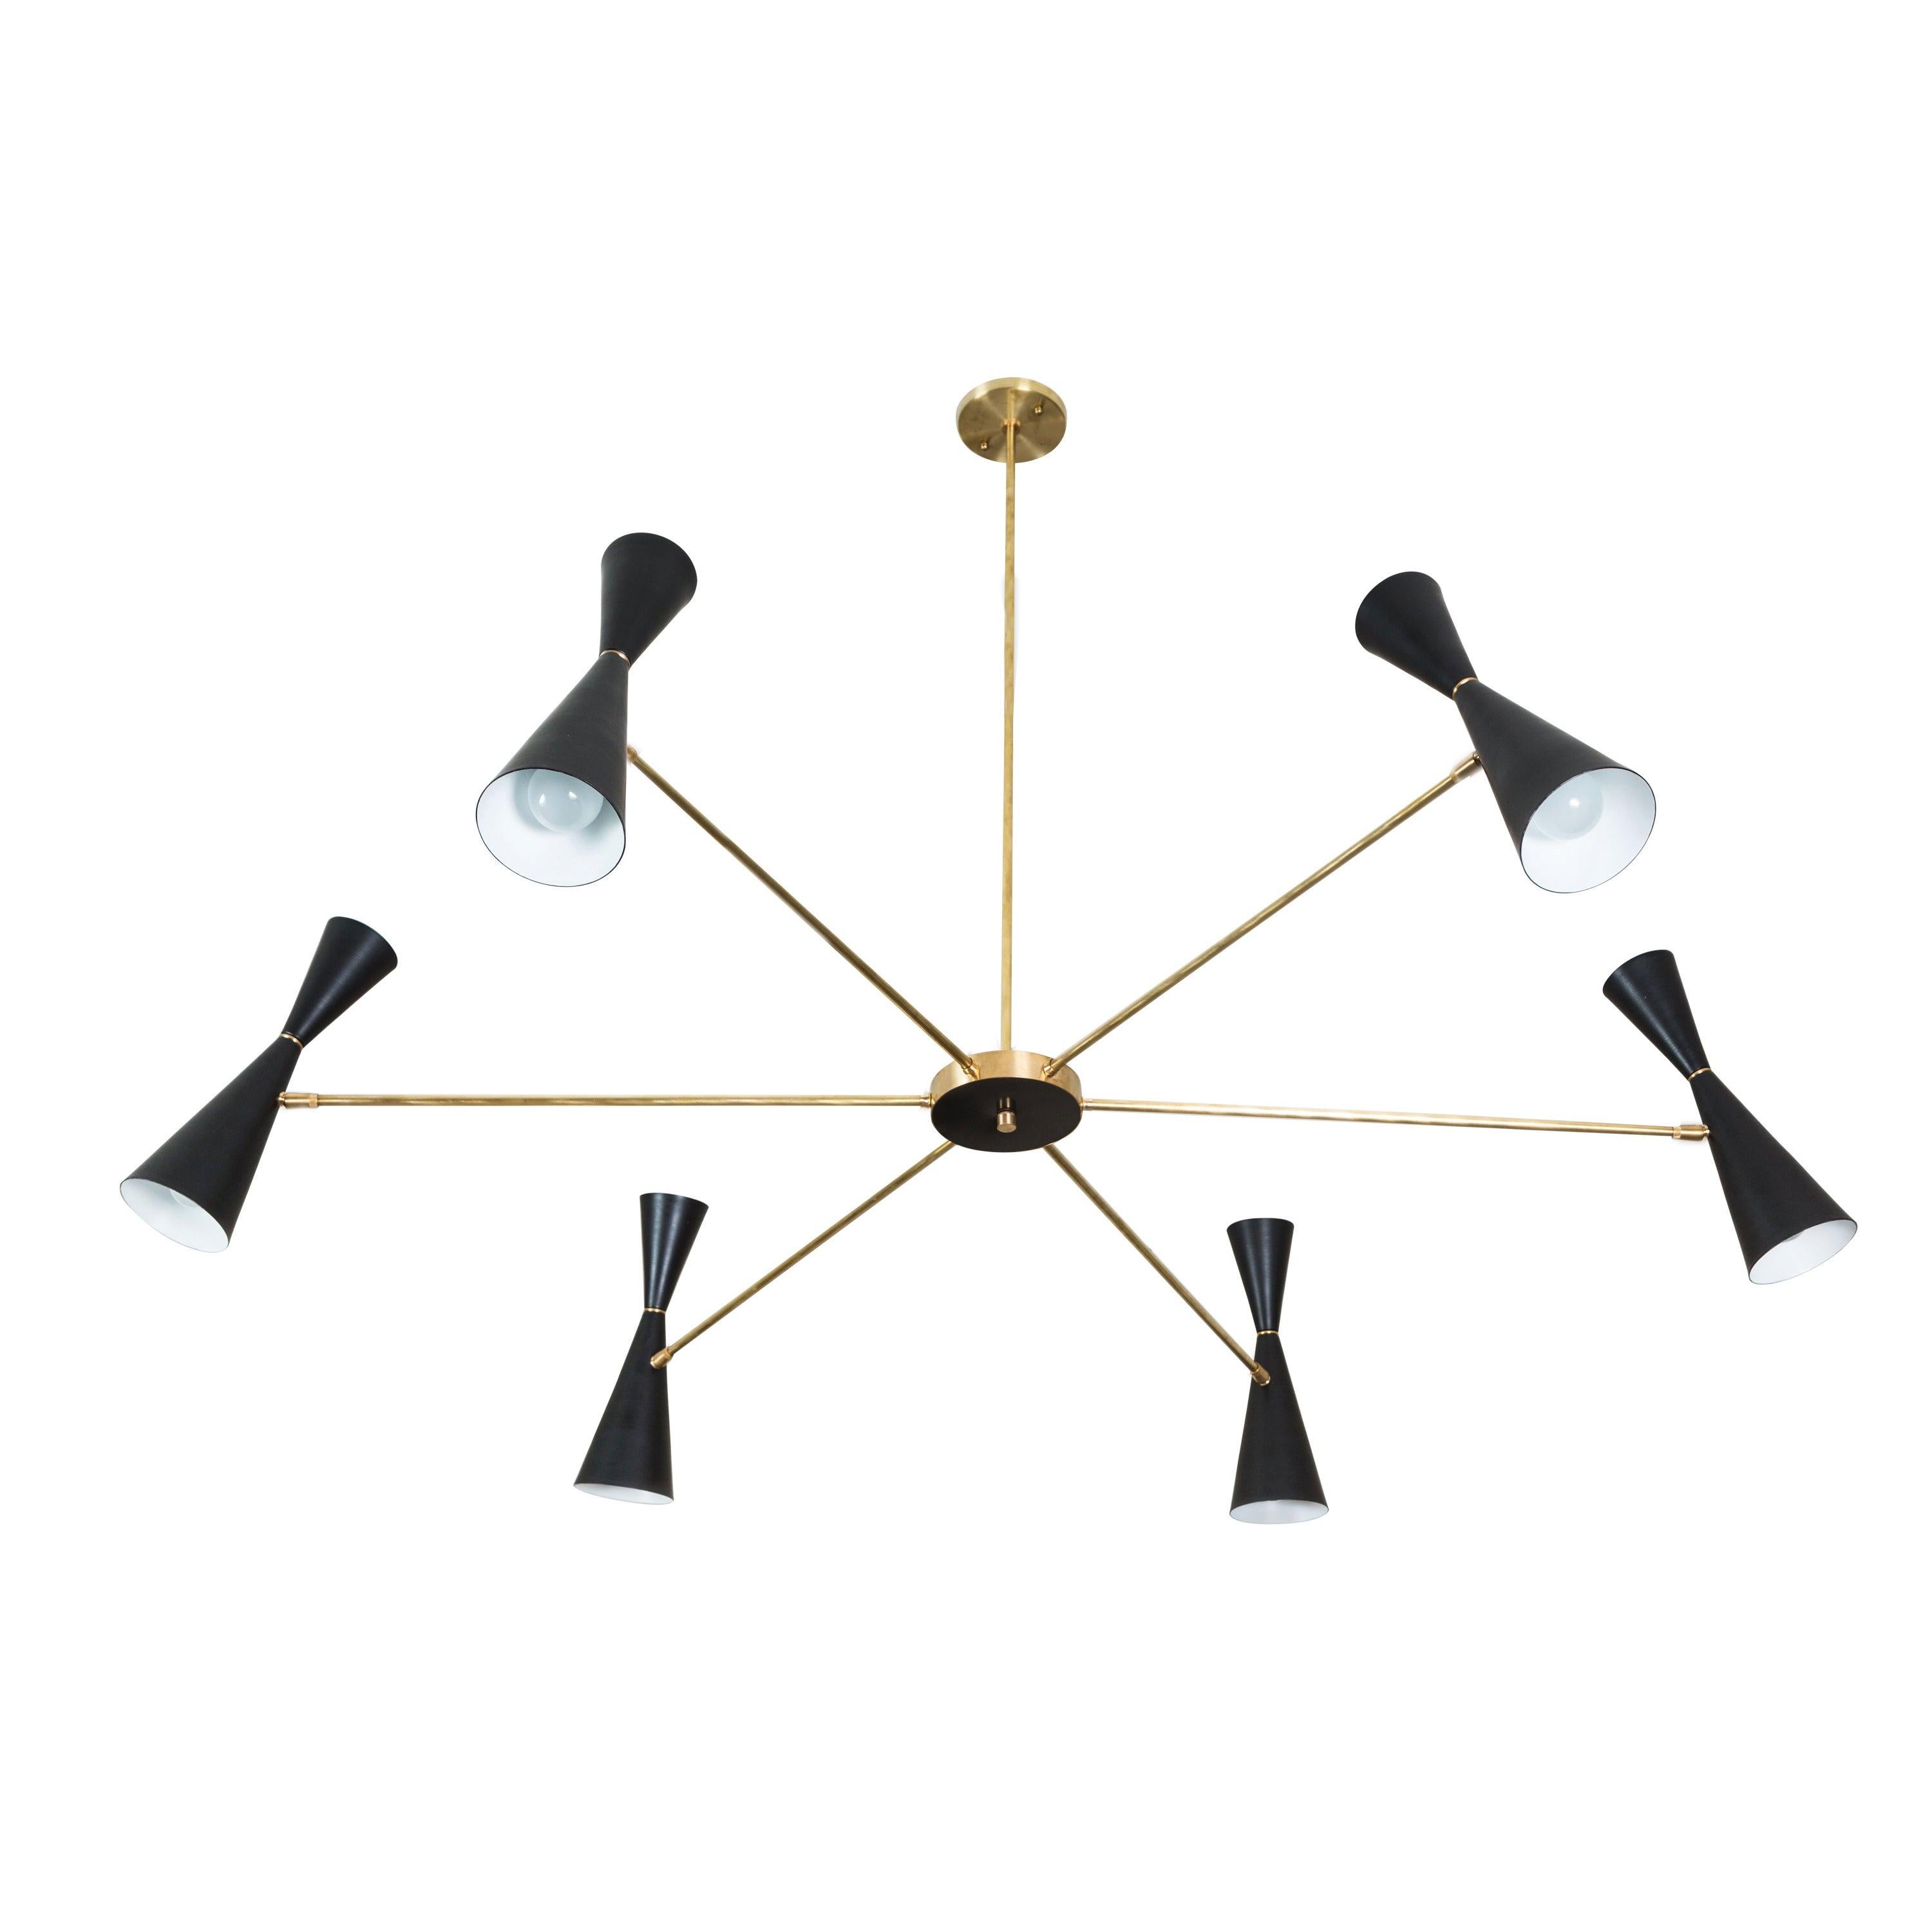 American White and Brass Radial Chandelier by Lawson-Fenning